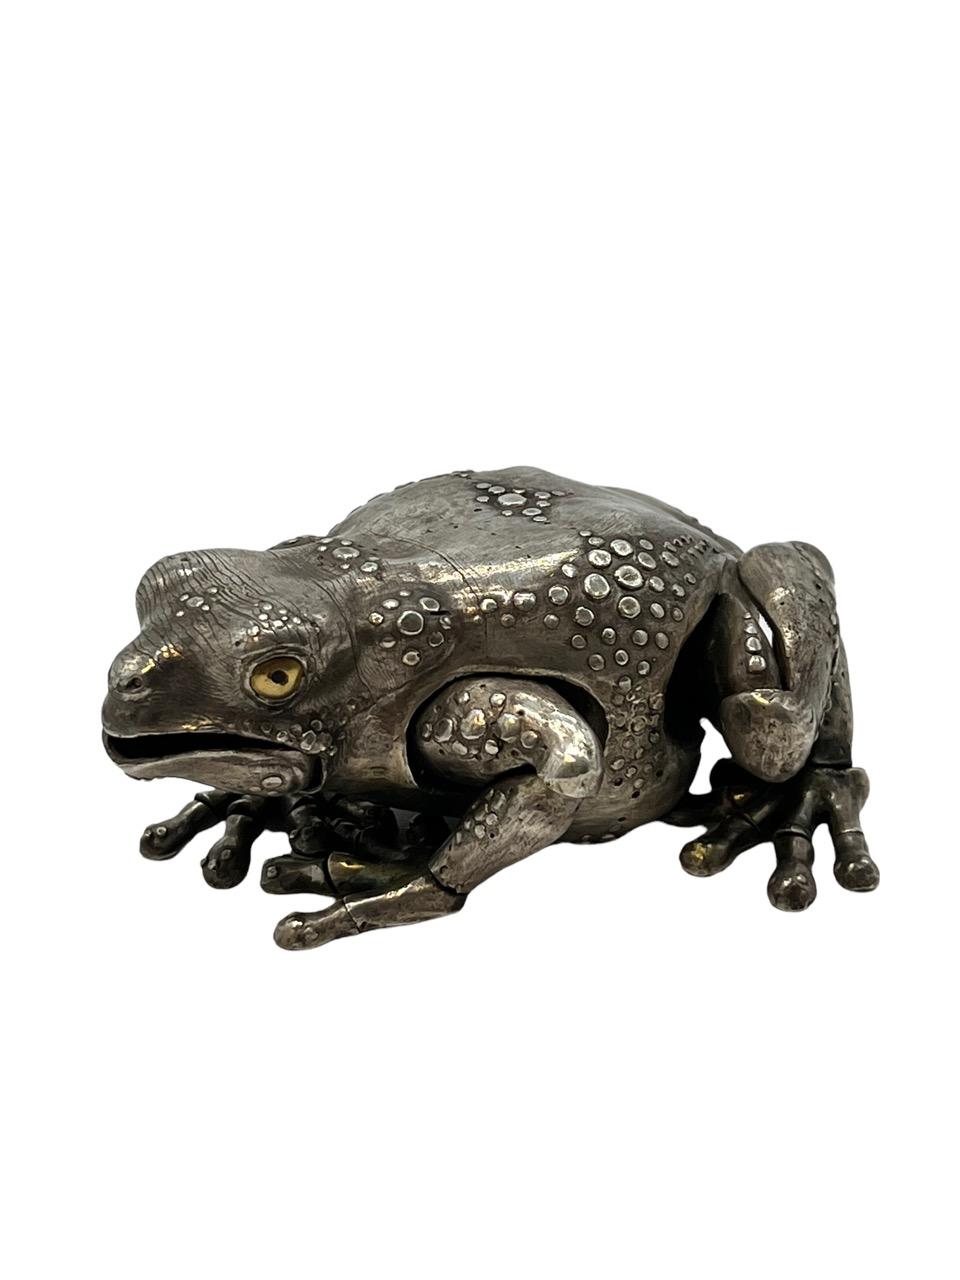 21st century fully articulated frog made of sterling silver by artist Oleg Konstantinov. It is realistically modeled with gold eyes and articulated legs, feet, toes, and mouth. 

